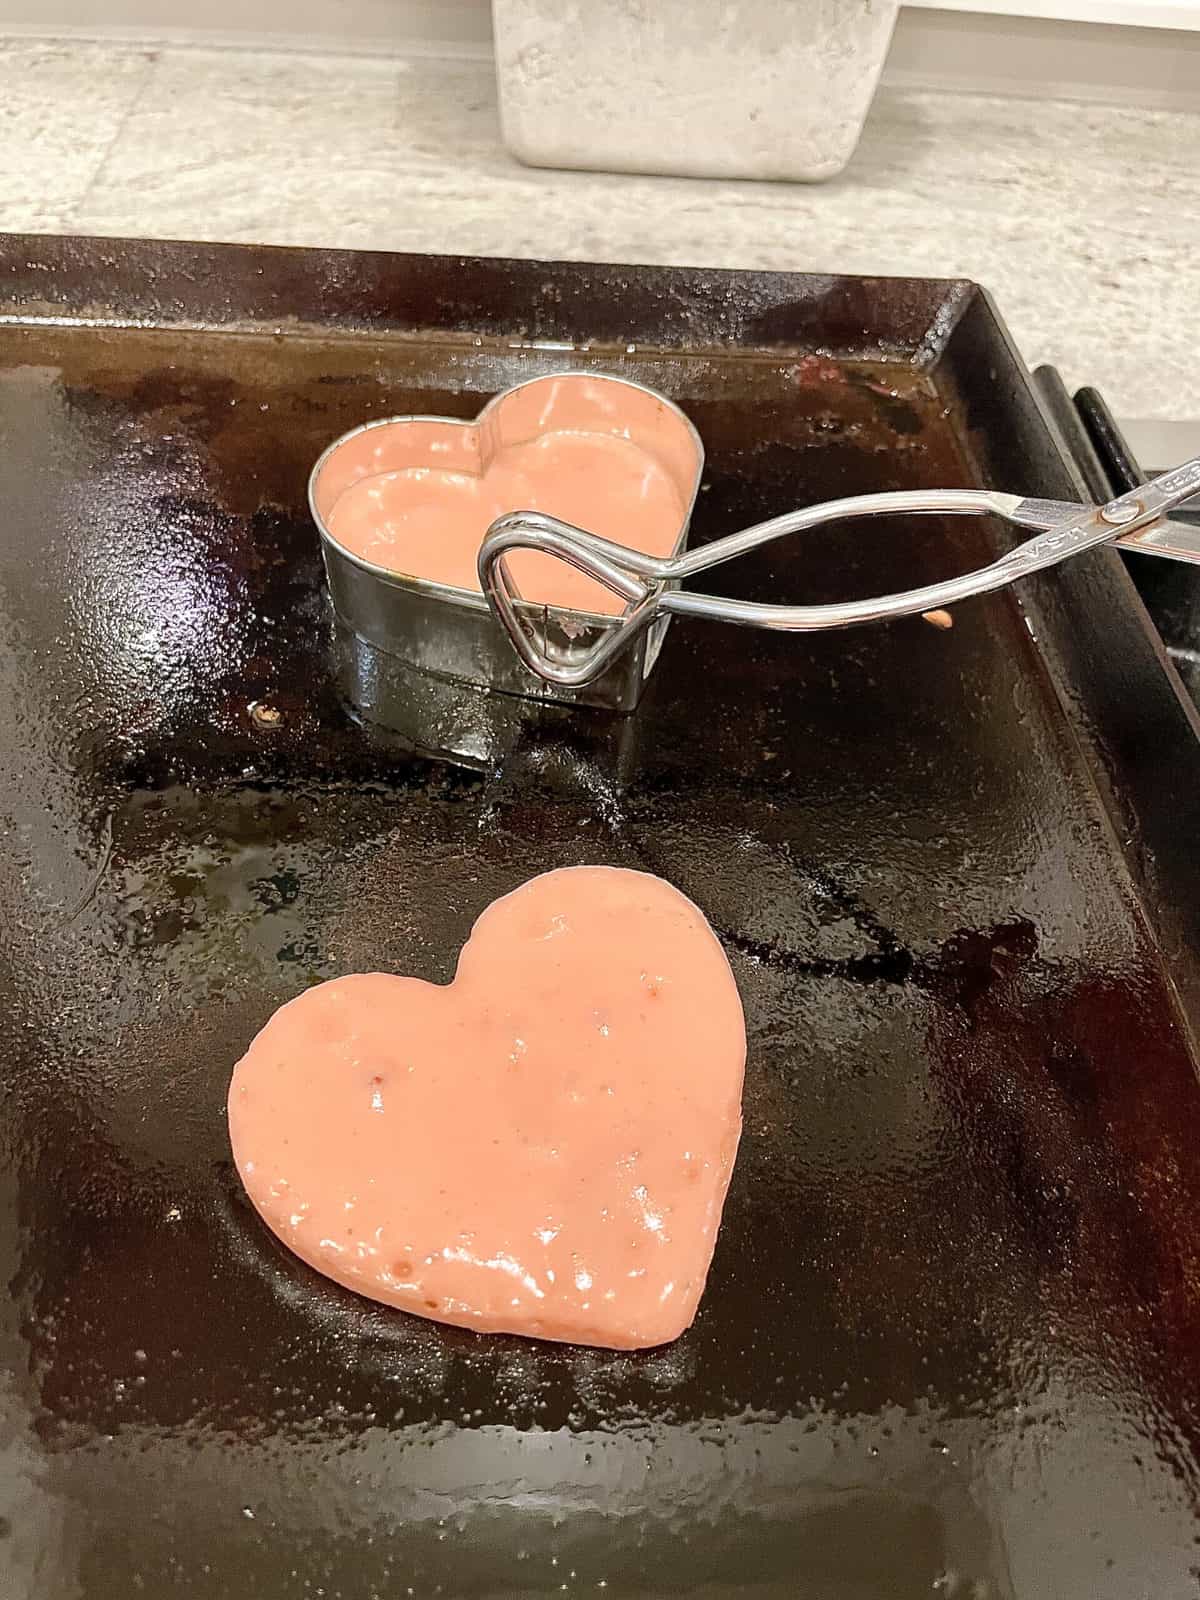 Remove cookie cutters from pancakes with tongs